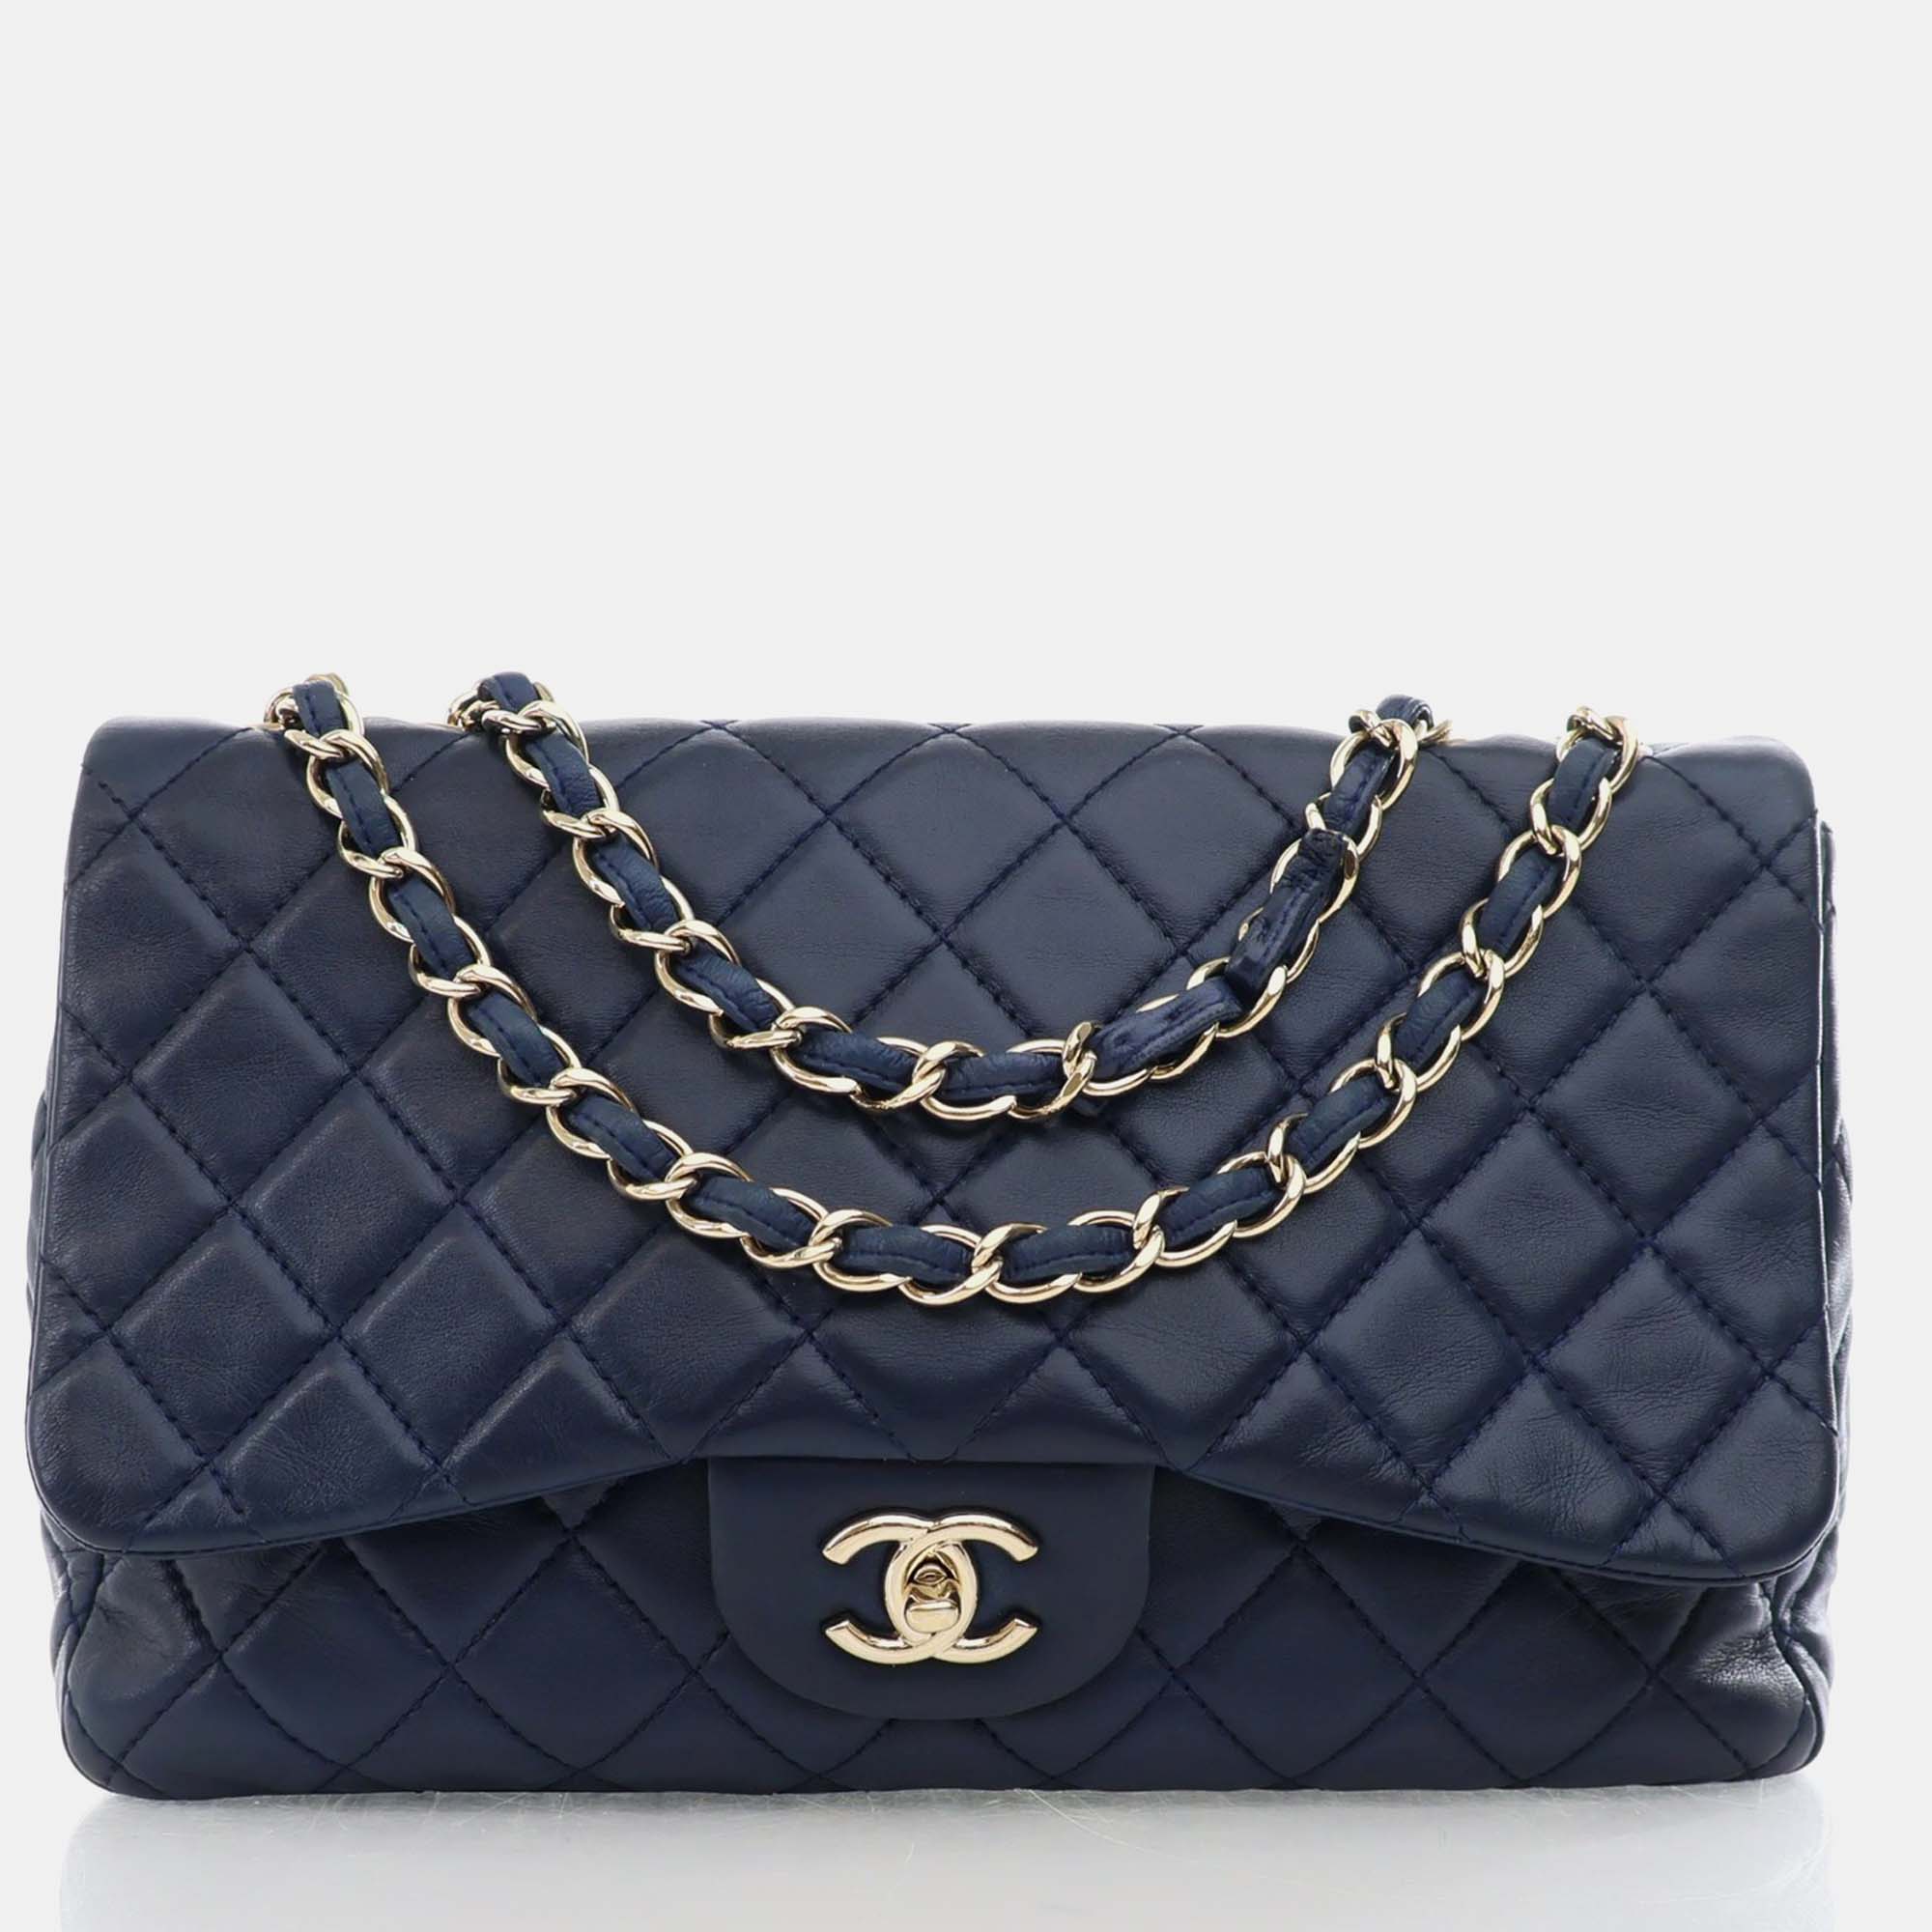 Pre-owned Chanel Blue Leather Jumbo Classic Single Flap Shoulder Bags